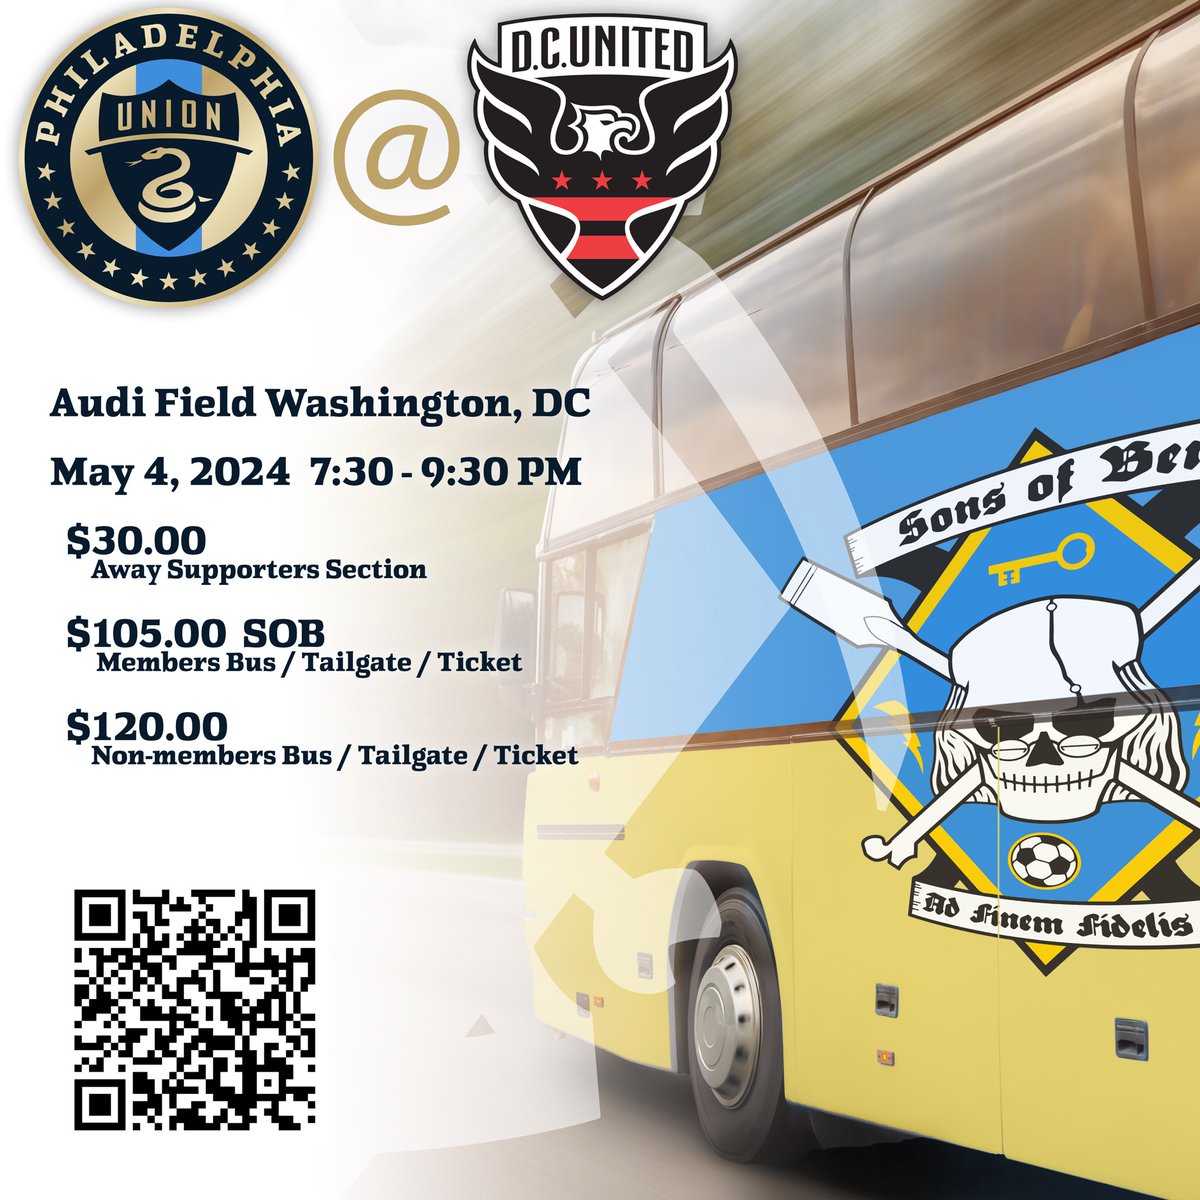 🚌 Join Sons of Ben on May 4th for a road trip to DC to support our Boys in blue @PhilaUnion! Ticket sales end April 19th. Snag your spot now: bit.ly/3VQMDpm #SonsOfBen #DOOP #RoadTrip